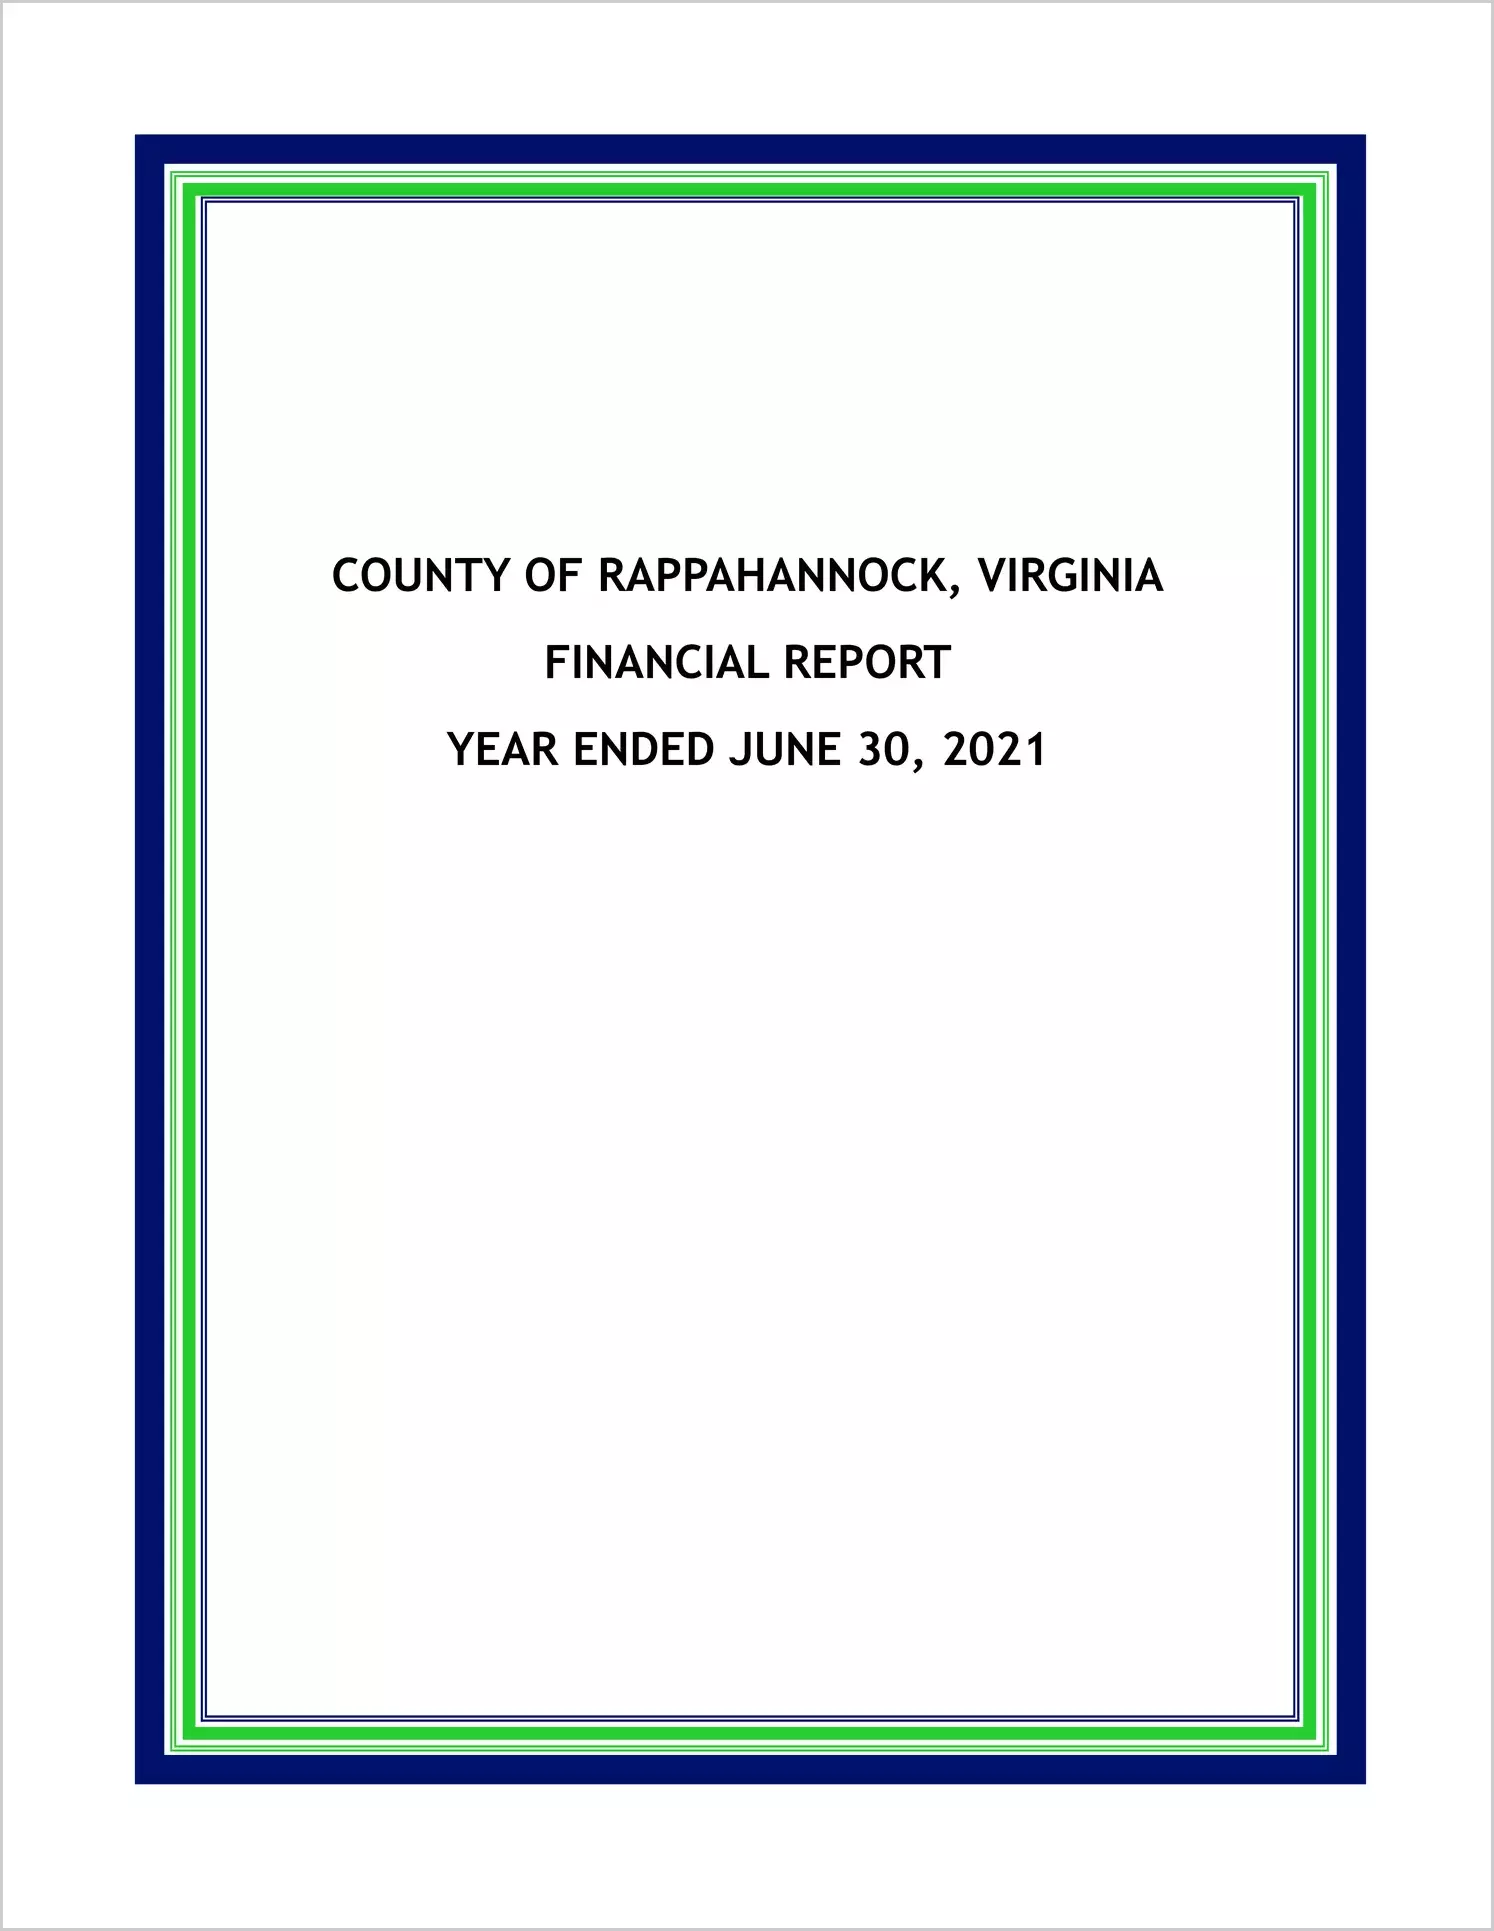 2021 Annual Financial Report for County of Rappahannock